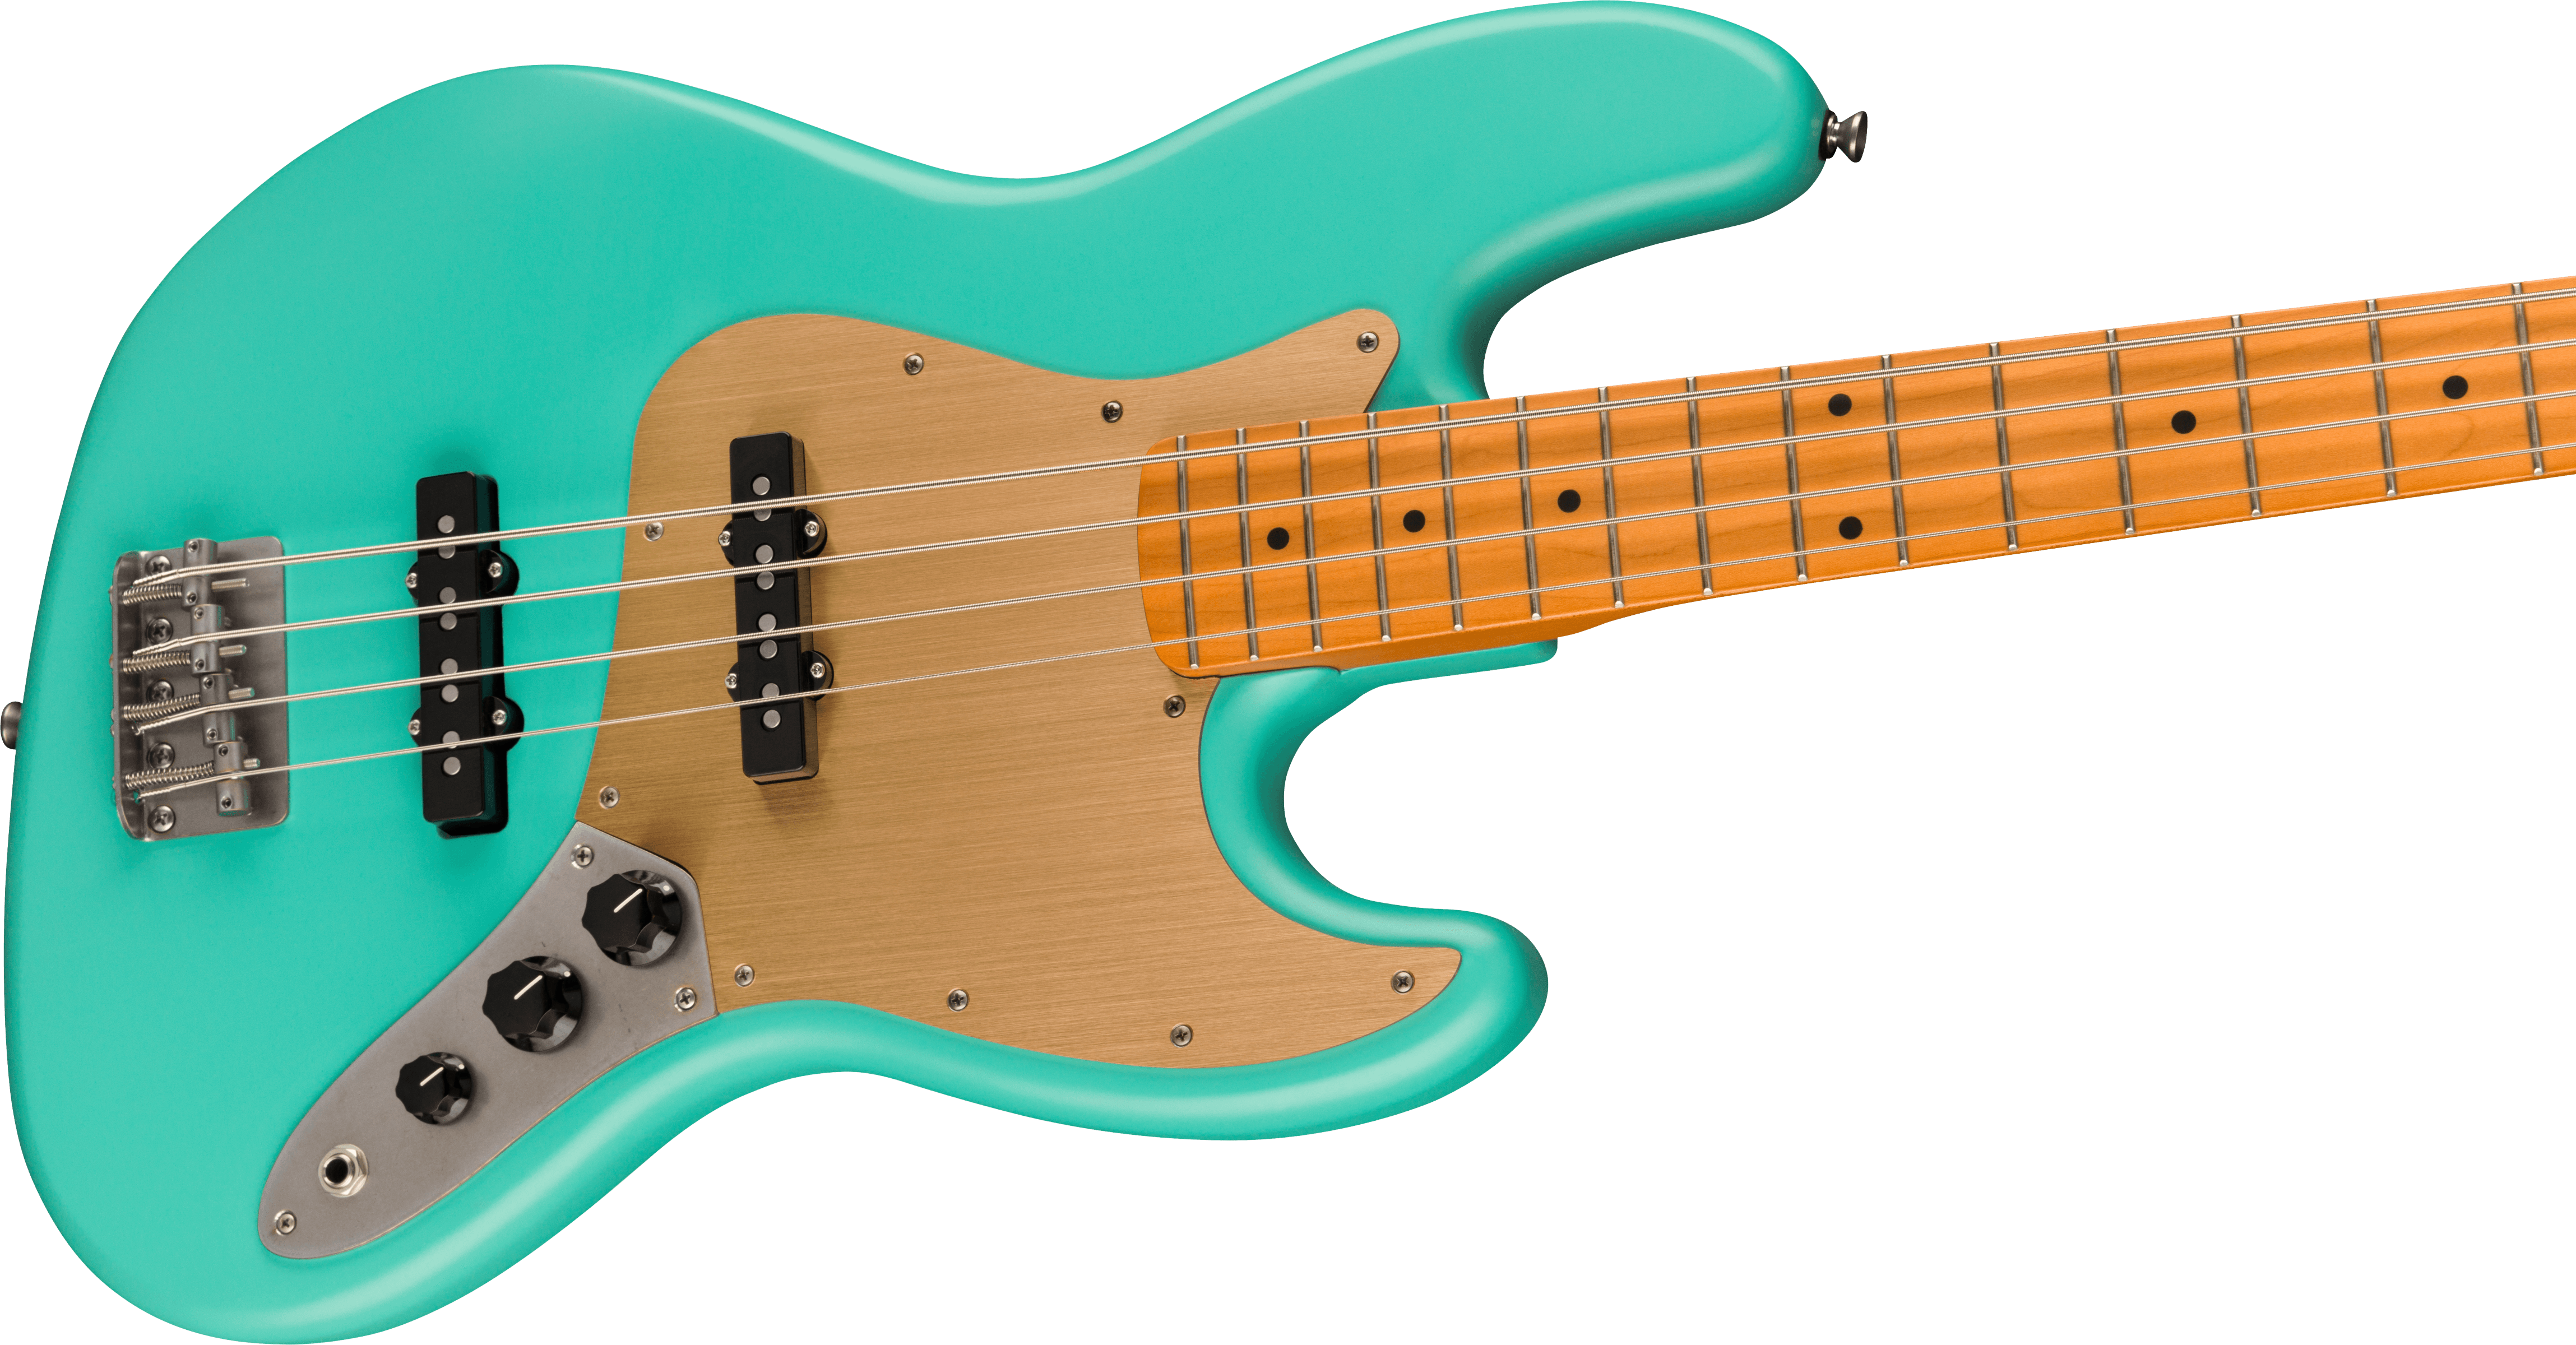 Squier Jazz Bass 40th Anniversary Gold Edition Mn - Satin Seafoam Green - Basse Électrique Solid Body - Variation 3